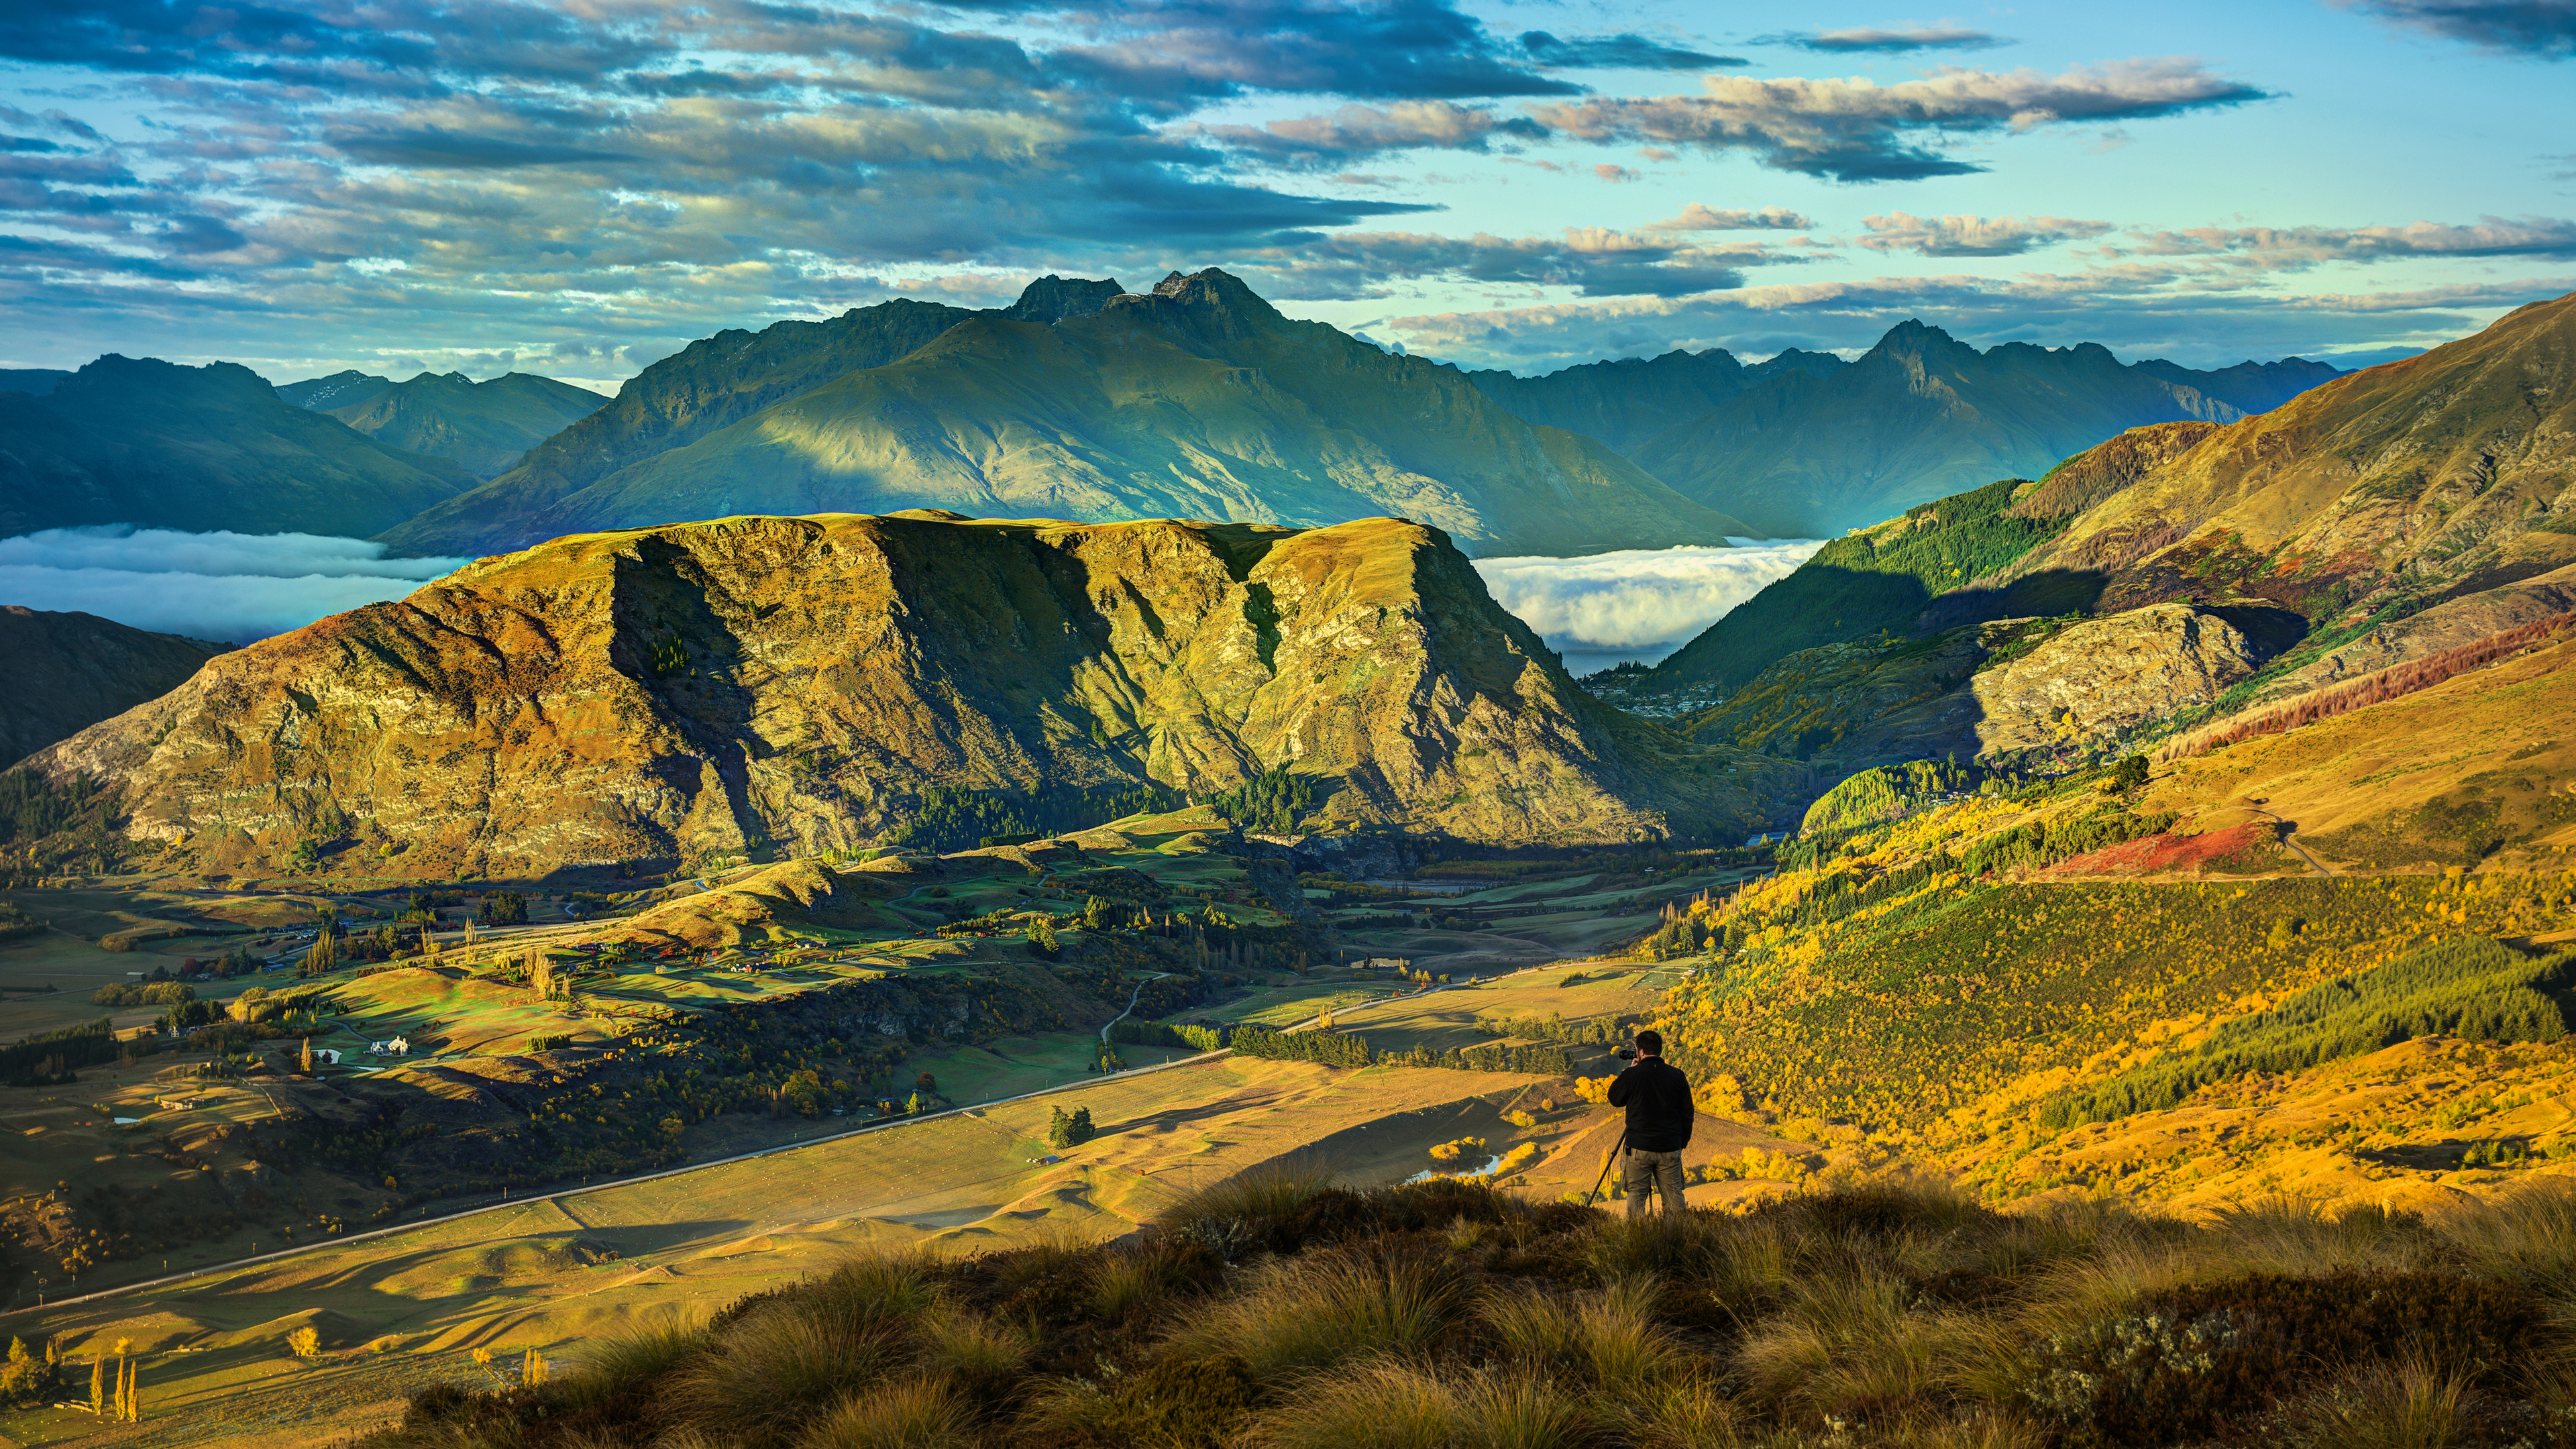 General 3840x2160 landscape 4K mountain top mountains field clouds sky New Zealand Queenstown nature